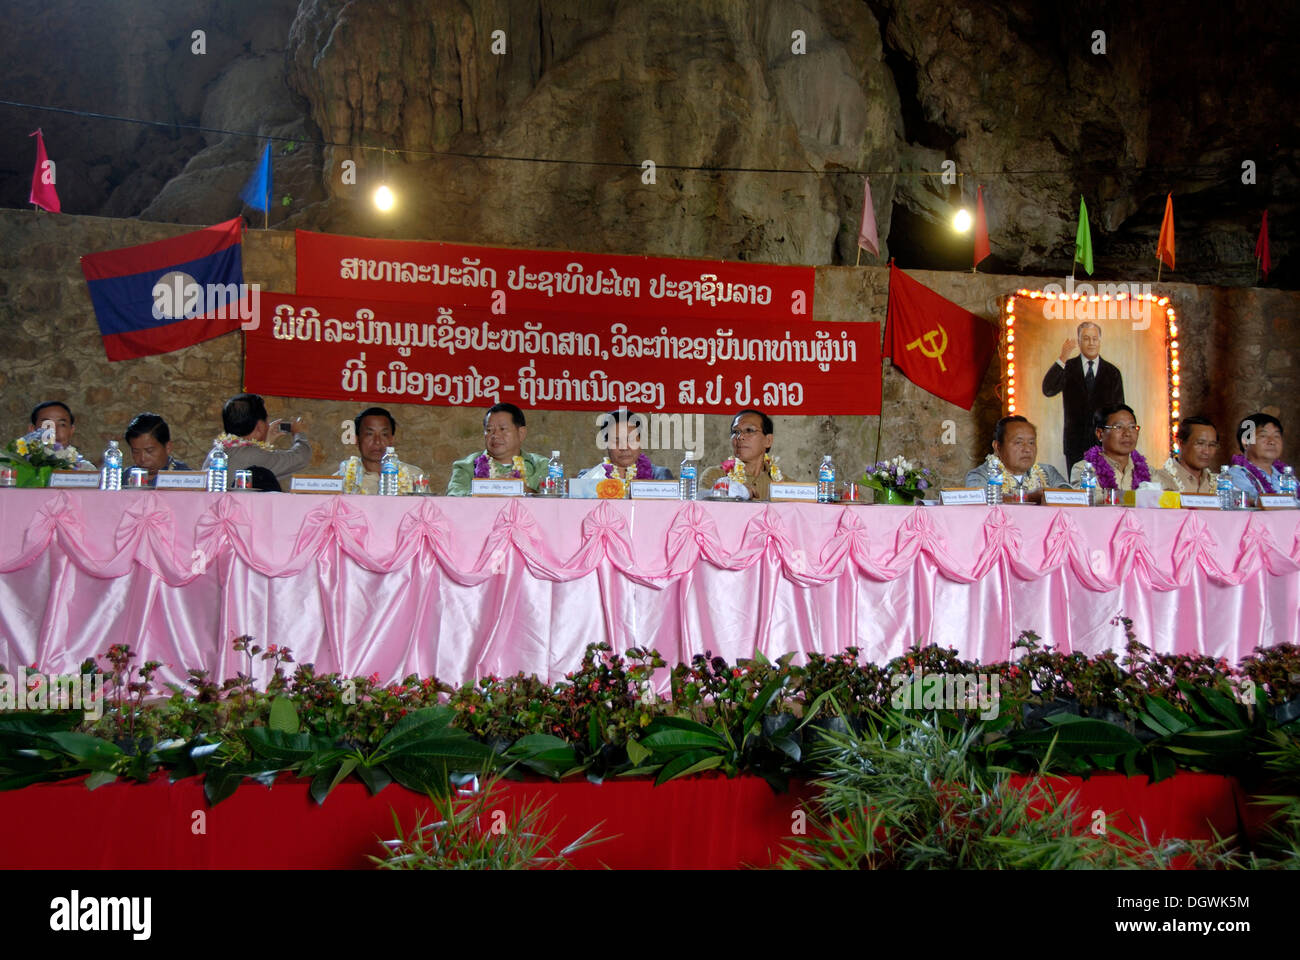 Event of the Communist Party in the Tham Sang Lot Cave, Elephant Cave, long table with many delegates, portrait of former Prime Stock Photo